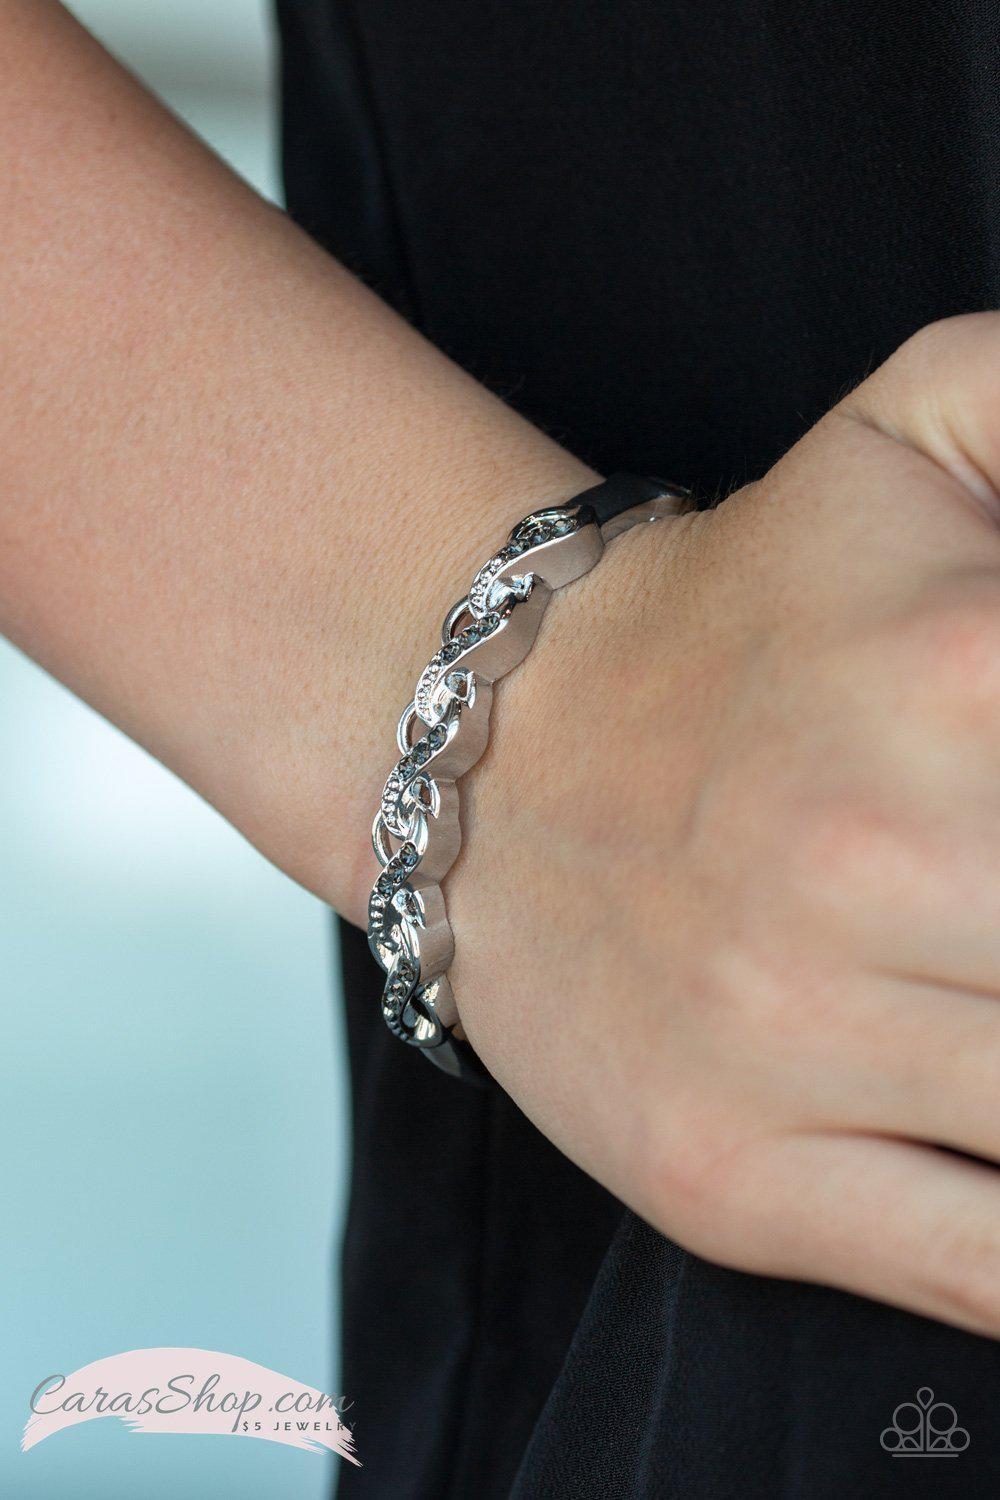 Infinite Sparkle Silver hinged bangle Bracelet - Paparazzi Accessories-CarasShop.com - $5 Jewelry by Cara Jewels